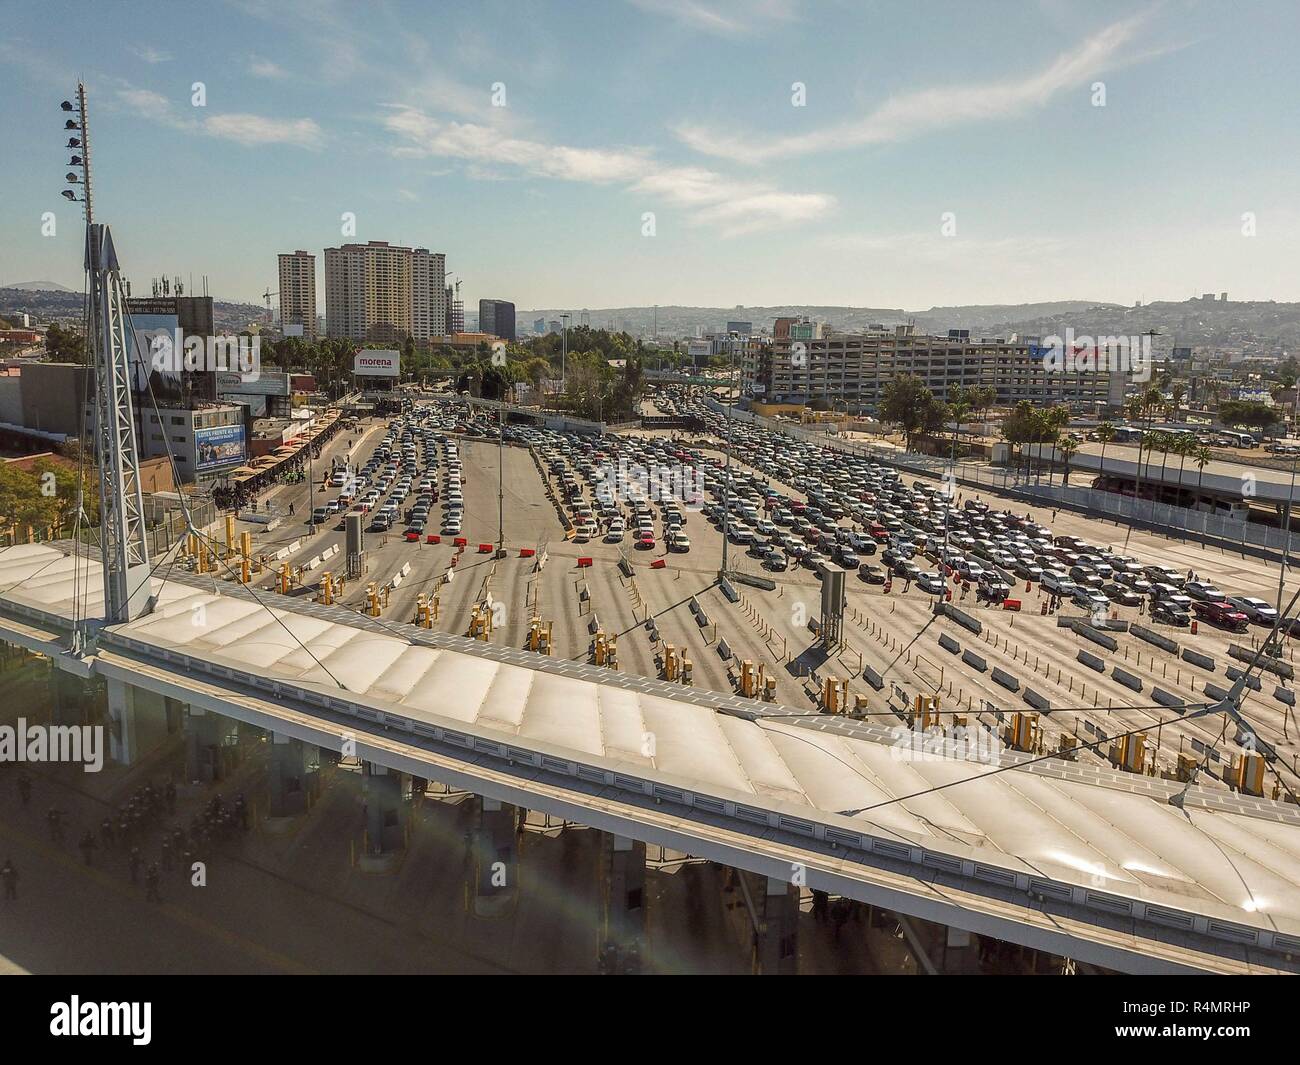 Vehicles line up at the border into the United States from Mexico as Customs and Border Patrol shut it down at the San Ysidro crossing after members of the migrant caravan attempted to illegally cross November 25, 2018 in San Ysidro, California. Stock Photo